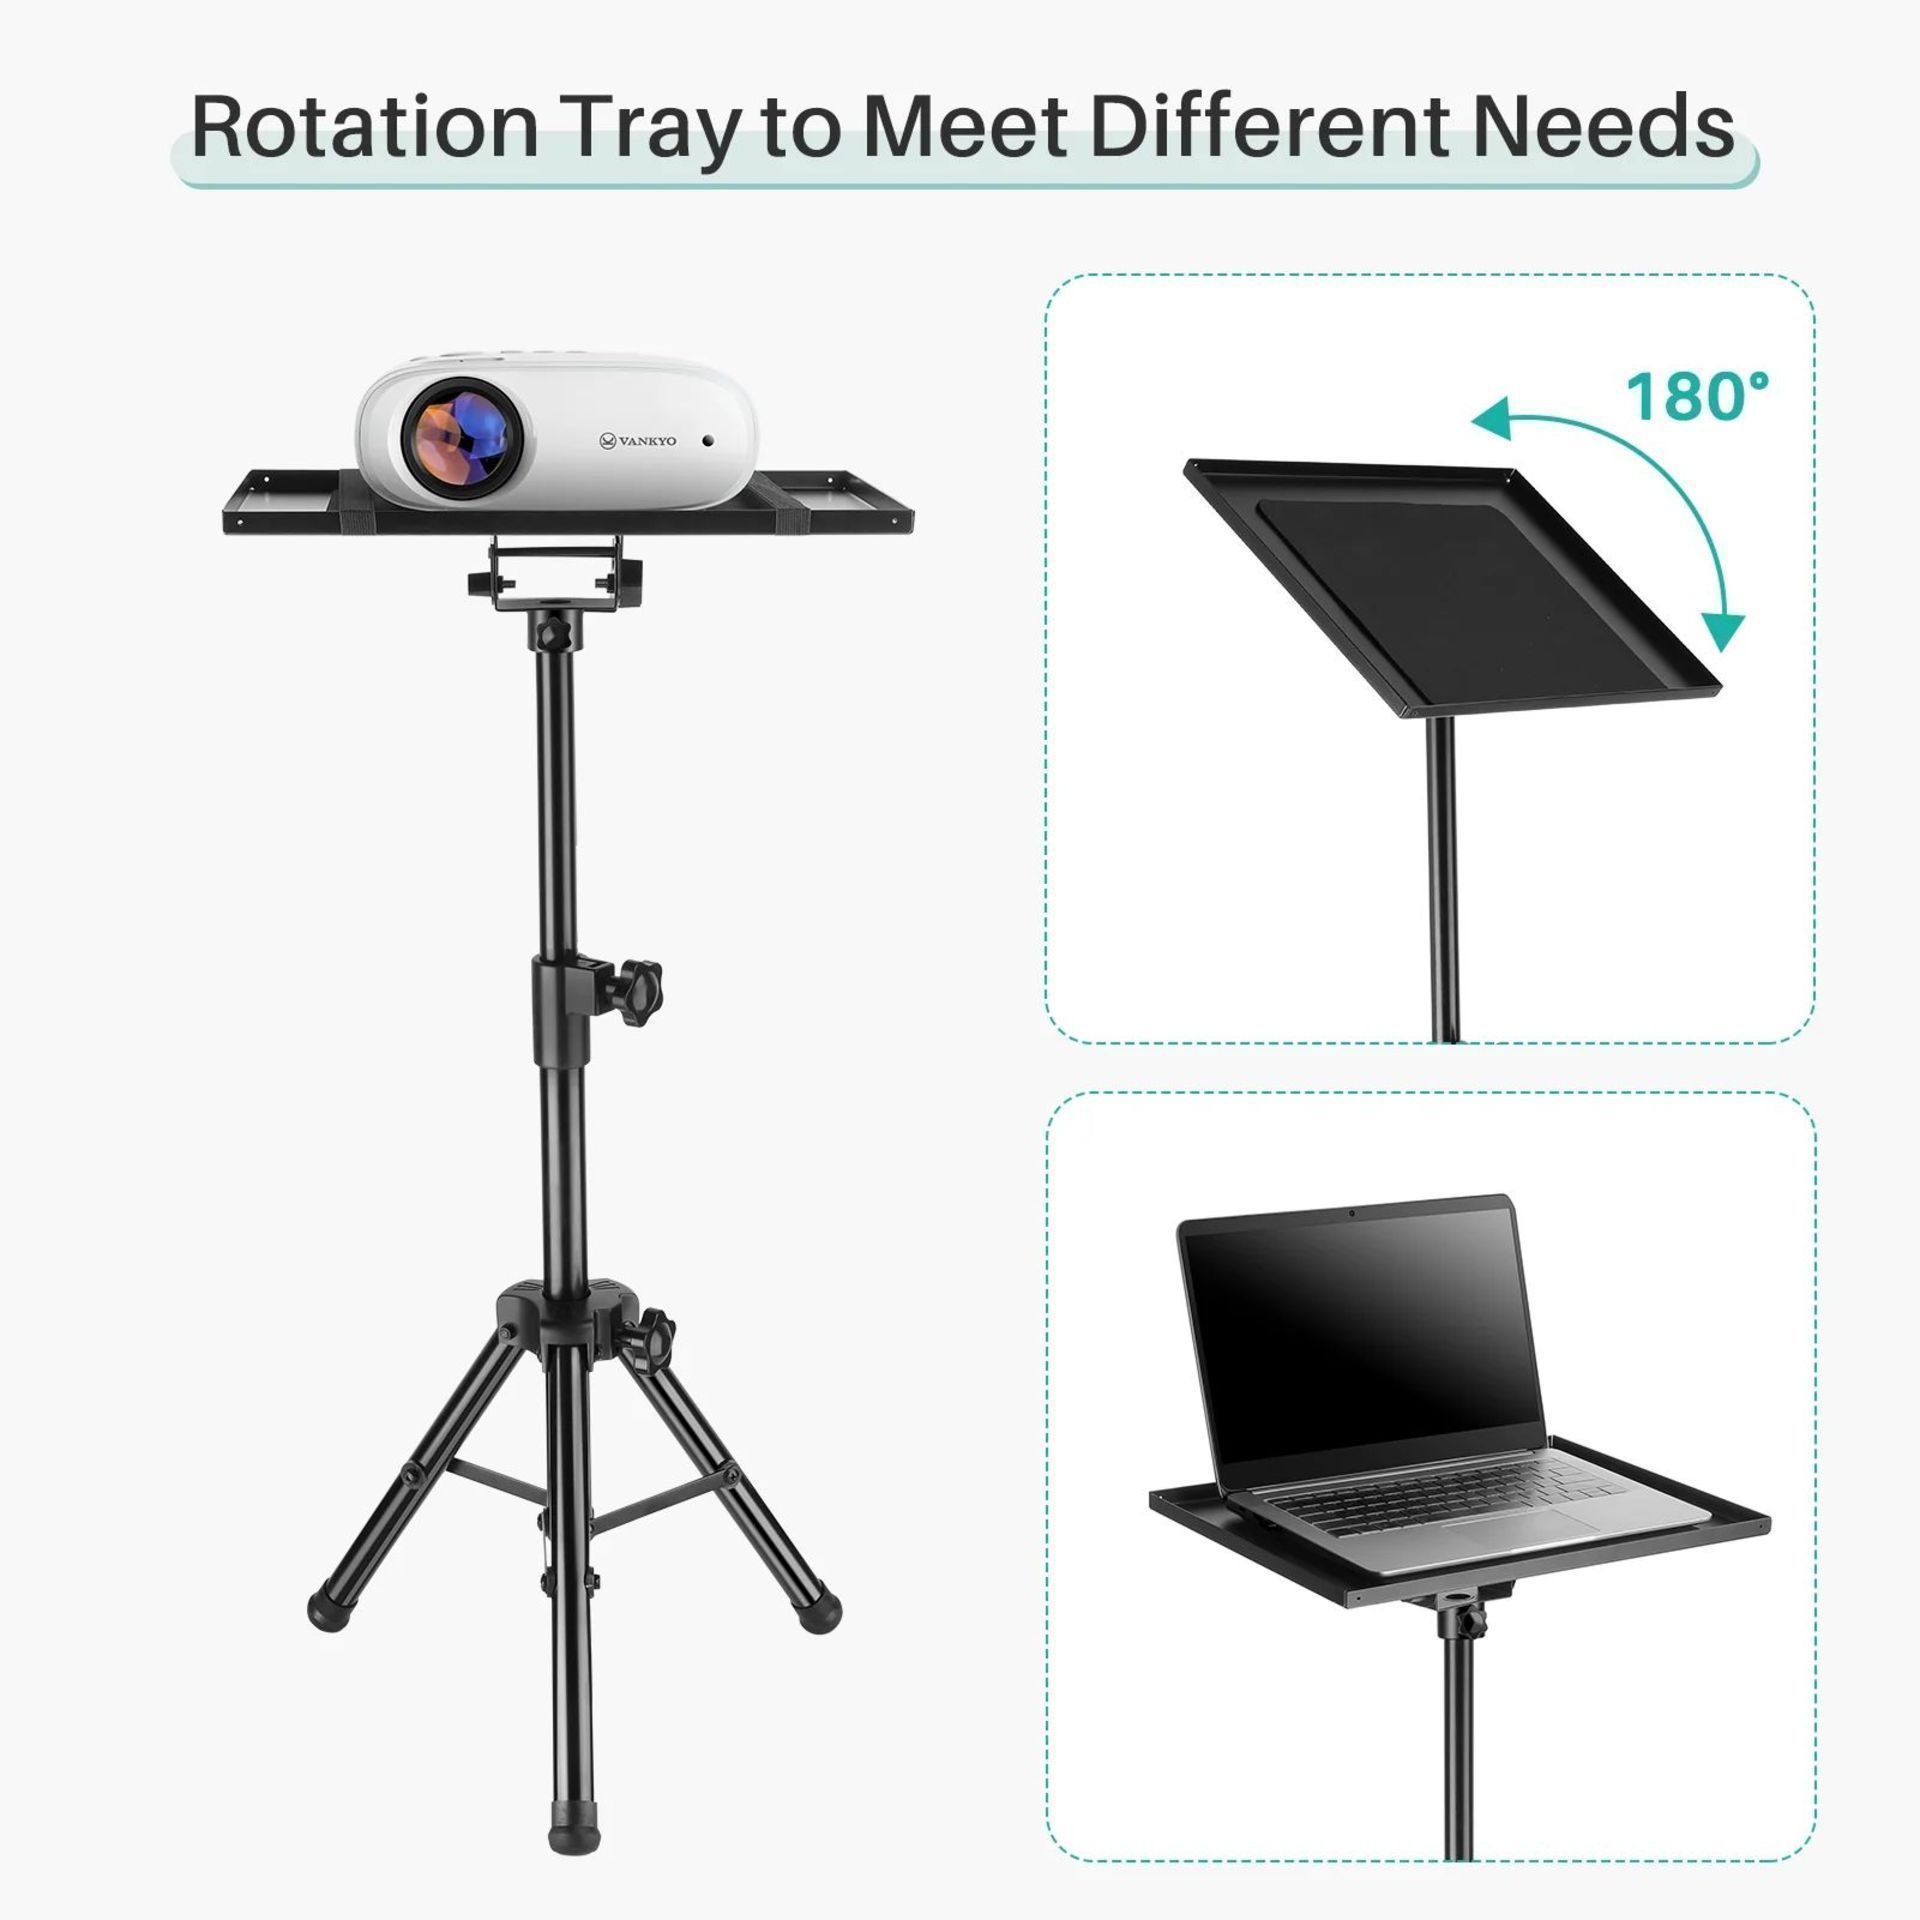 2 x New Boxed VANKYO PT30 Projector Stand. VANKYO Universal Laptop Projector Stand with 15'' x